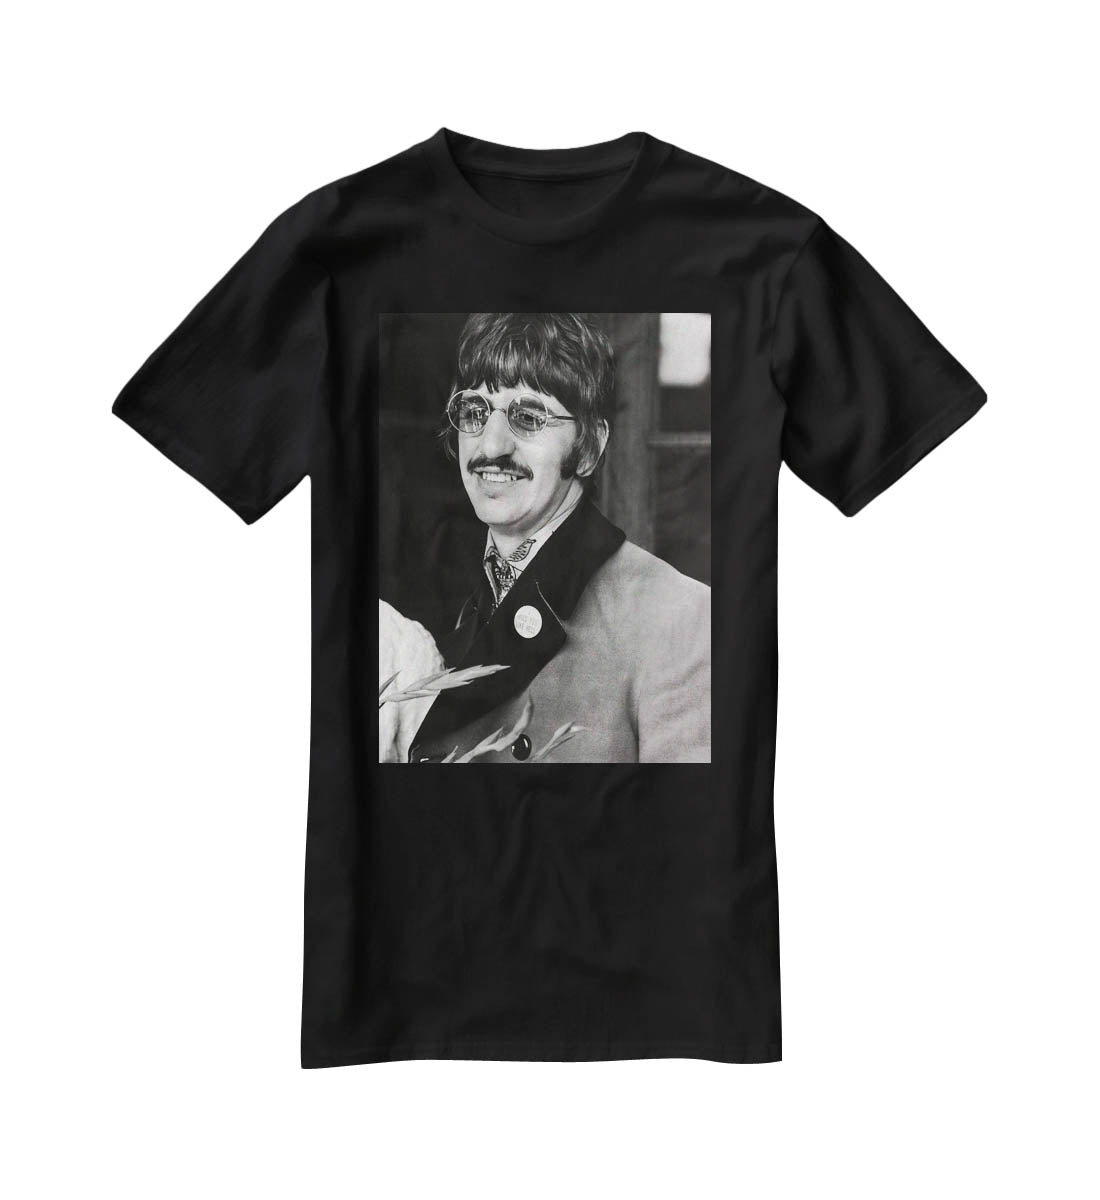 Ringo Starr of The Beatles in 1967 T-Shirt - Canvas Art Rocks - 1